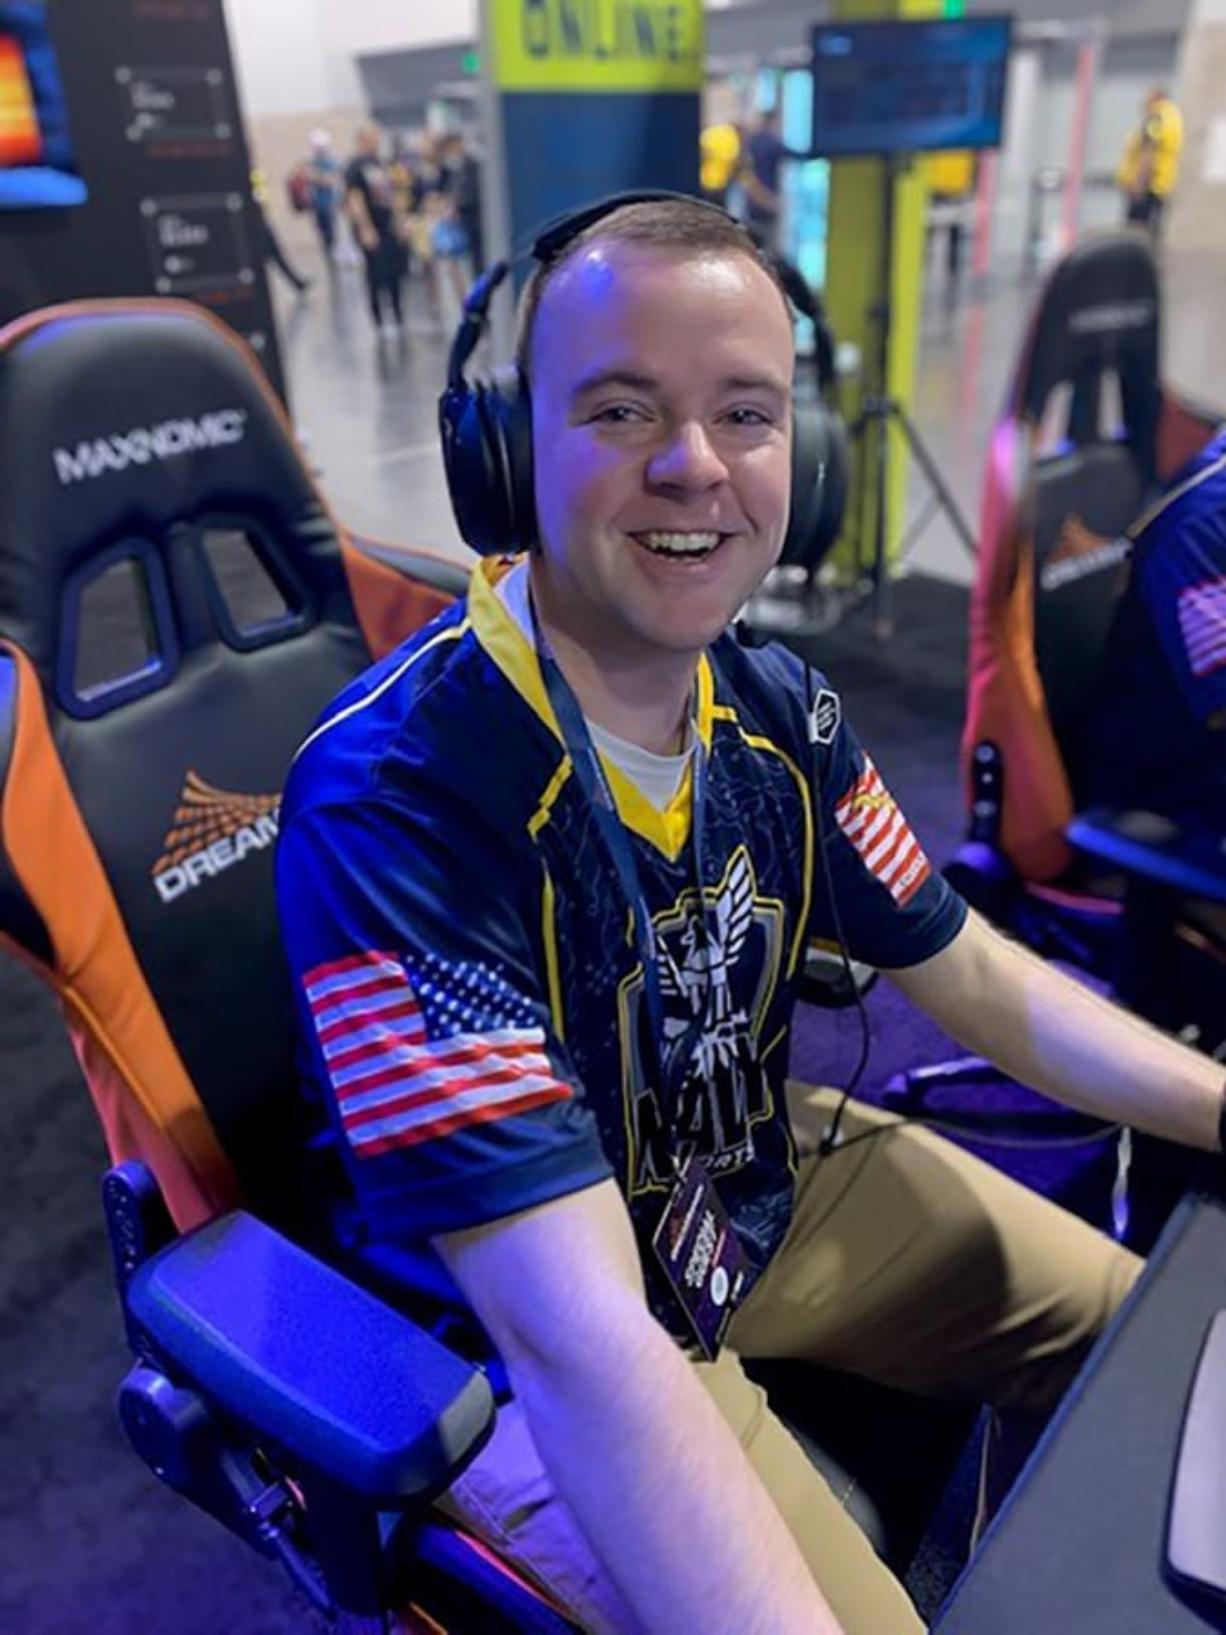 Riley Bufford played soccer at Prairie High School. Now, the U.S. Navy petty officer finds a similar teamwork and camaraderie  while playing for the Navy&#039;s first esports team, Goats and Glory.